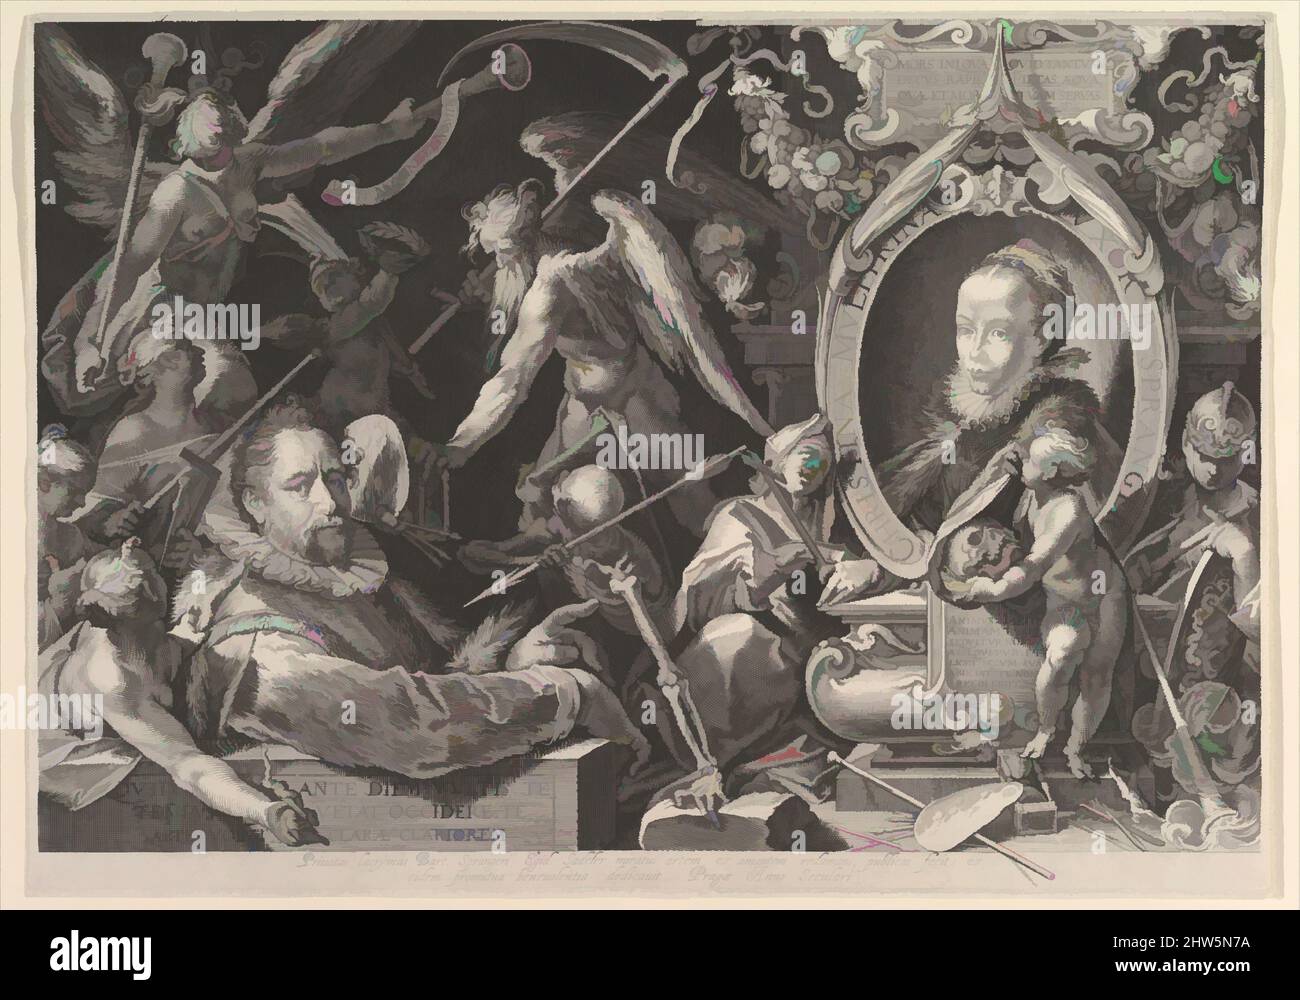 Art inspired by Portrait of Bartholomeus Spranger with an Allegory on the Death of his Wife, Christina Muller, 1600, Engraving; first state of two, sheet: 11 3/4 x 16 9/16 in. (29.9 x 42.1 cm), Prints, Aegidius Sadeler II (Netherlandish, Antwerp 1568–1629 Prague), After Bartholomeus, Classic works modernized by Artotop with a splash of modernity. Shapes, color and value, eye-catching visual impact on art. Emotions through freedom of artworks in a contemporary way. A timeless message pursuing a wildly creative new direction. Artists turning to the digital medium and creating the Artotop NFT Stock Photo